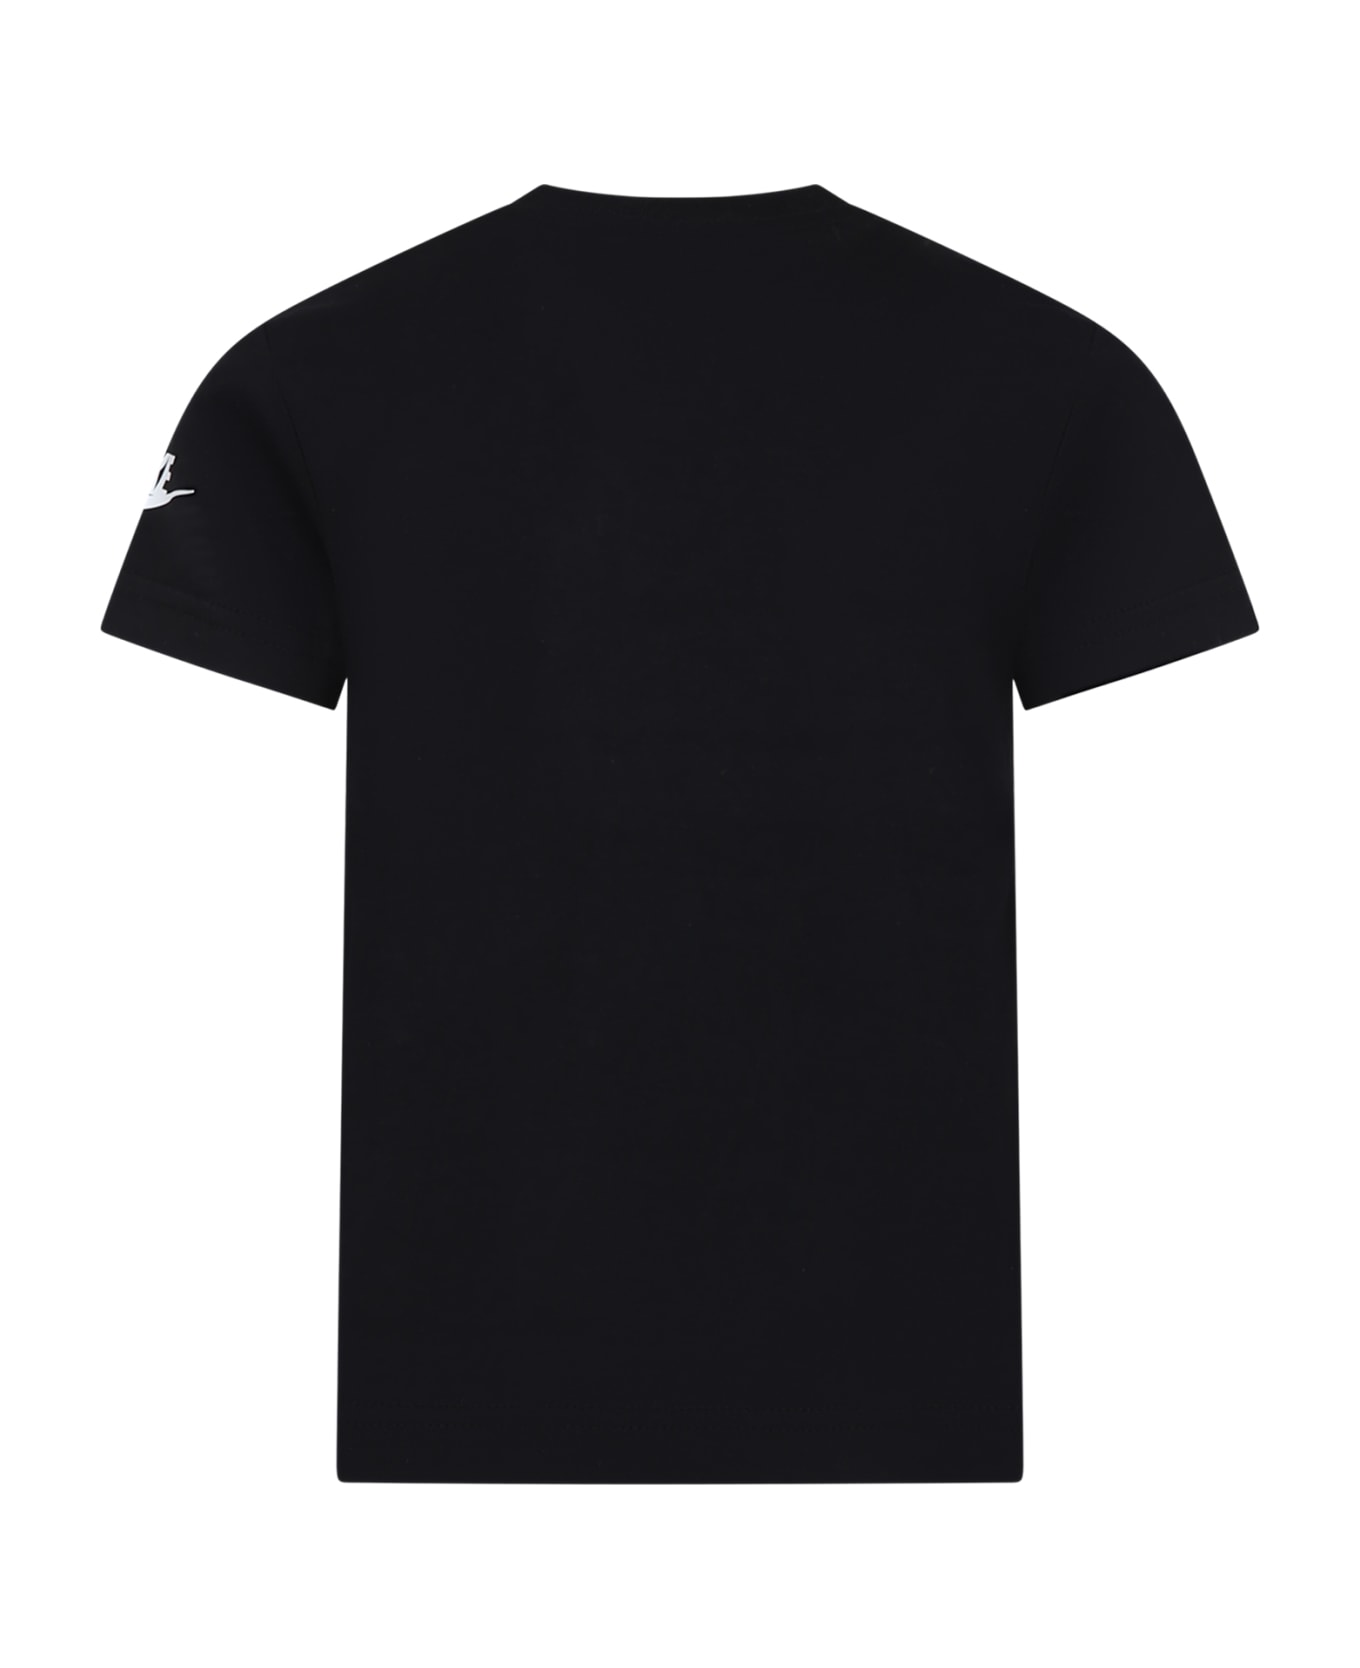 Nike Black T-shirt For Kids With Logo - Black Tシャツ＆ポロシャツ